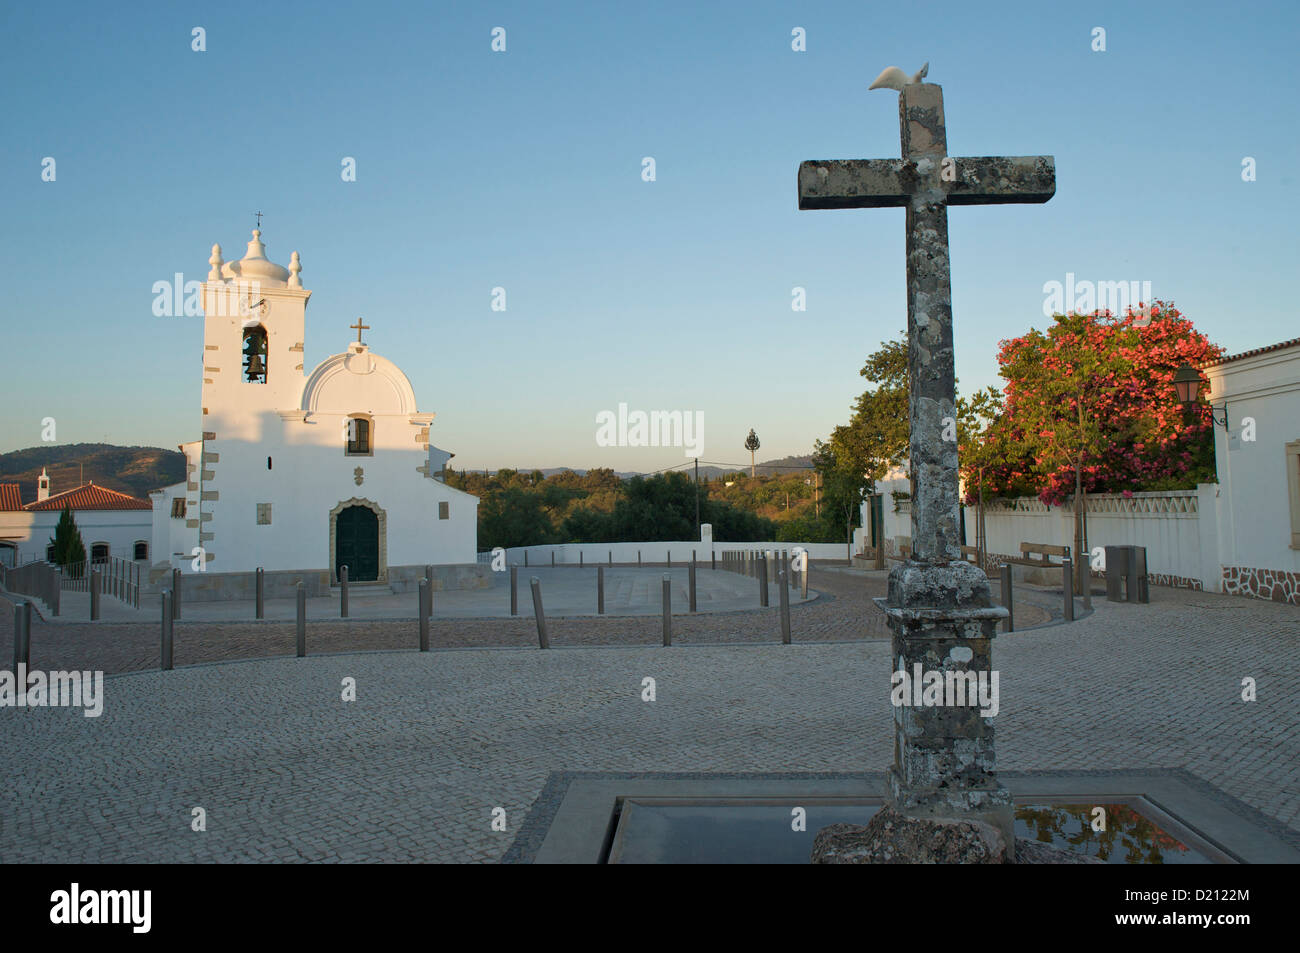 Stone cross and church at the countryside village, Querenca, Algarve, Portugal, Europe Stock Photo